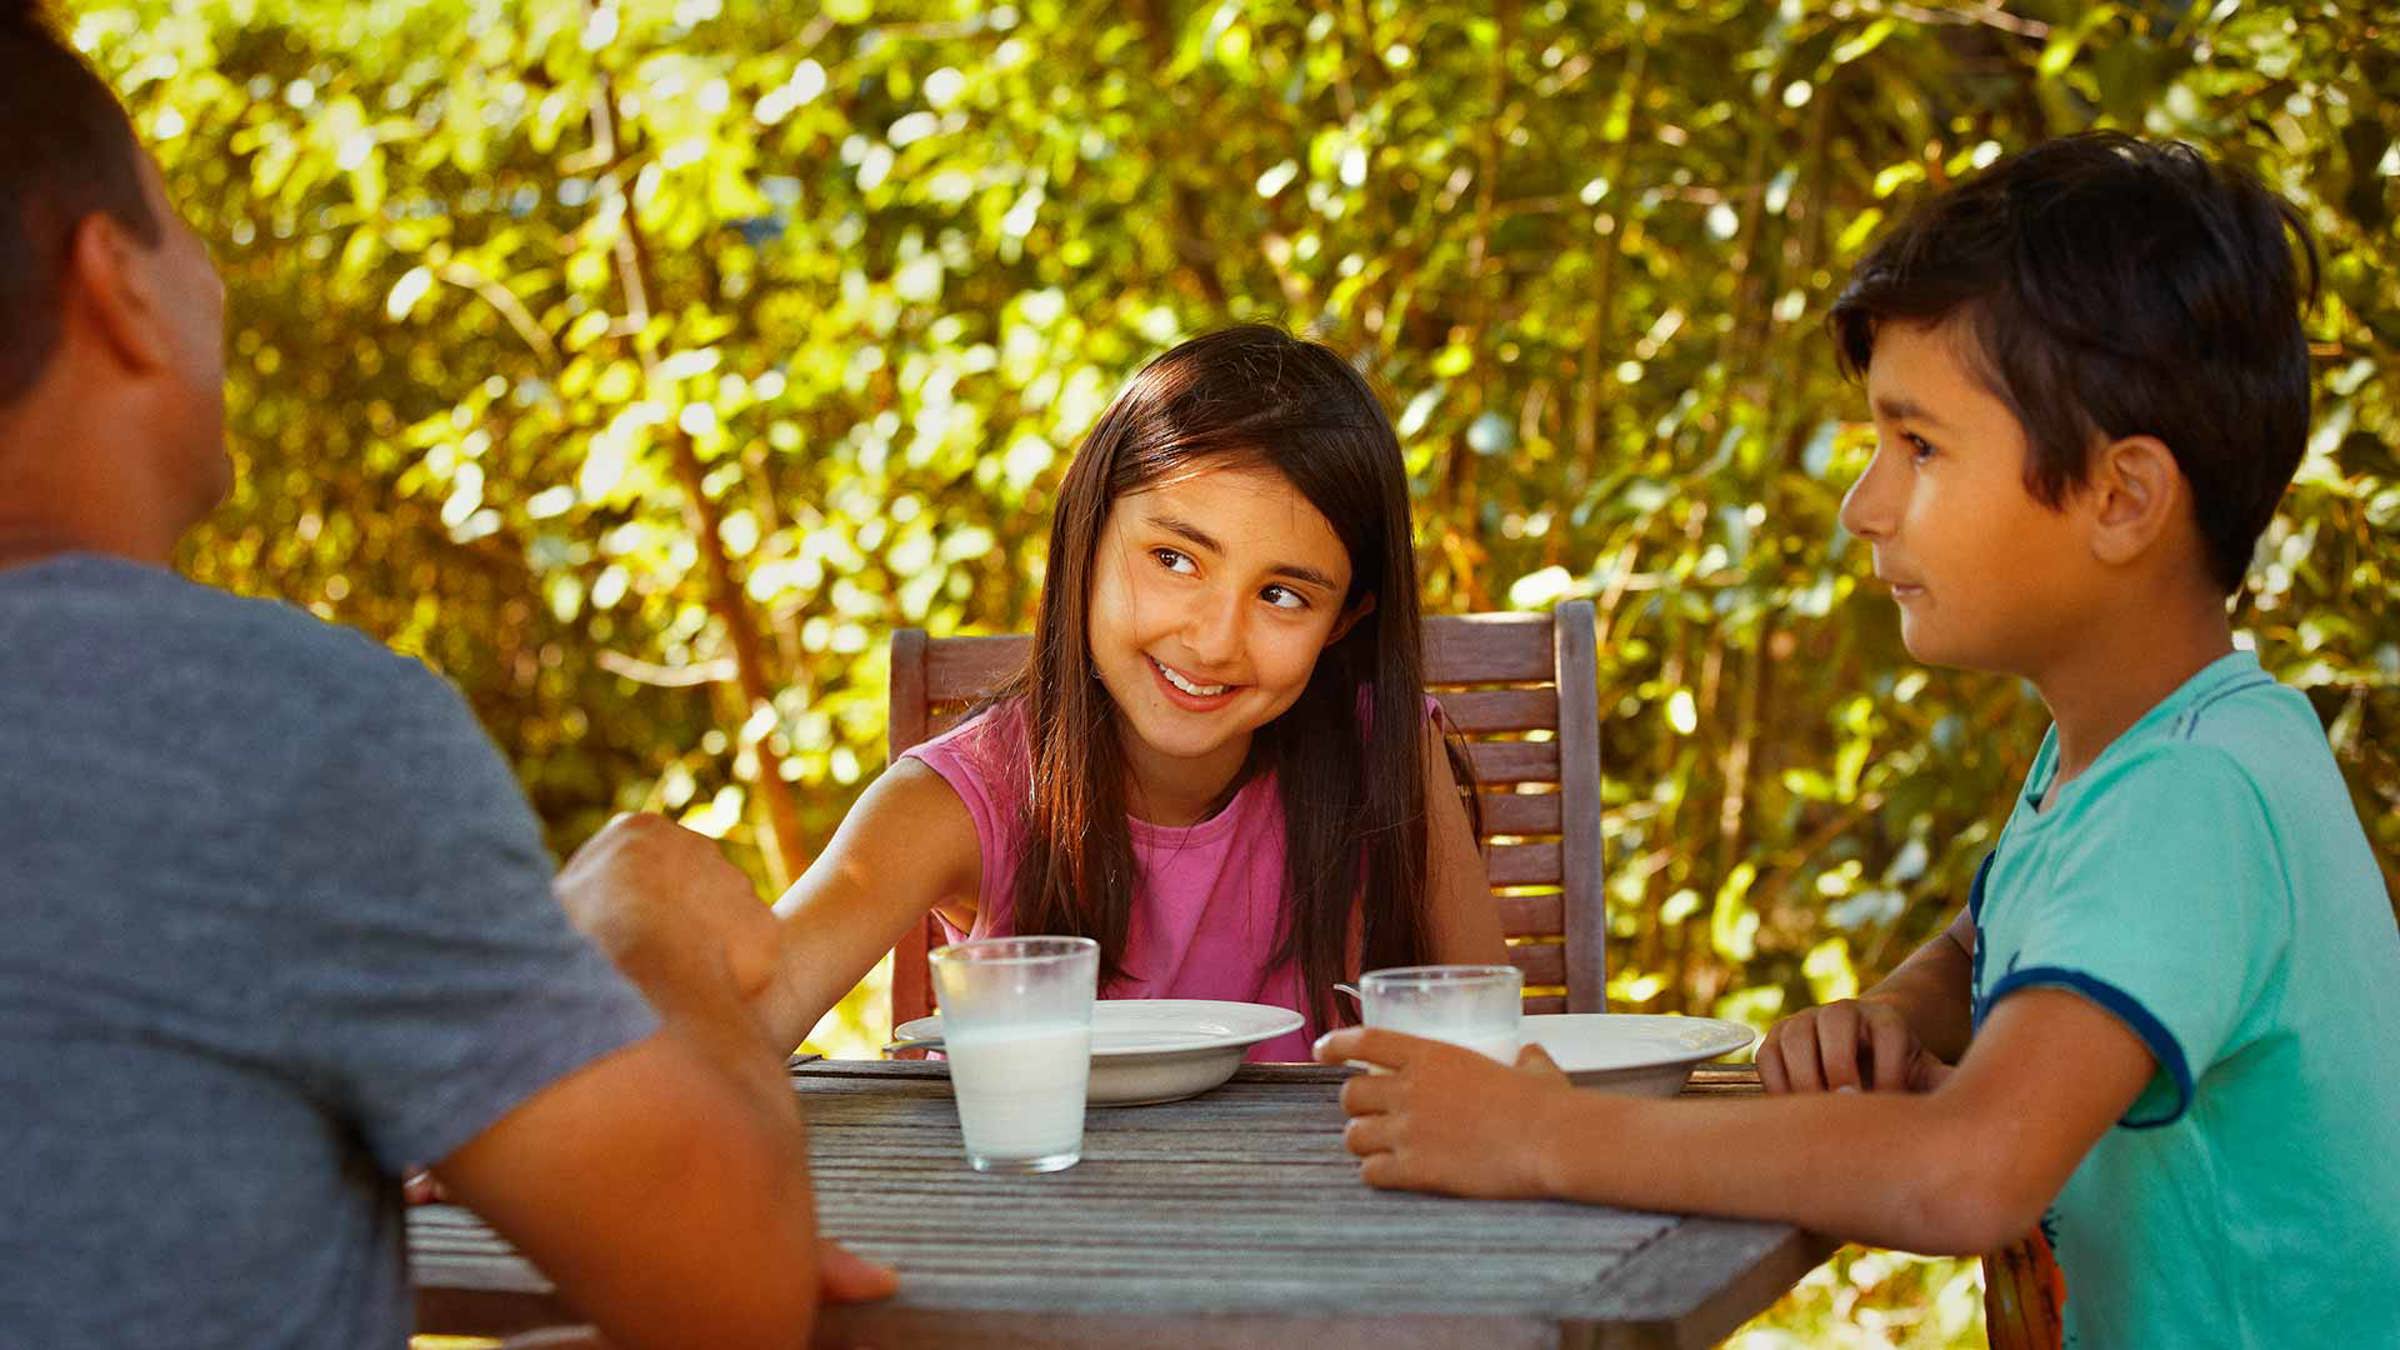 Children smiling at an outdoor dinner table